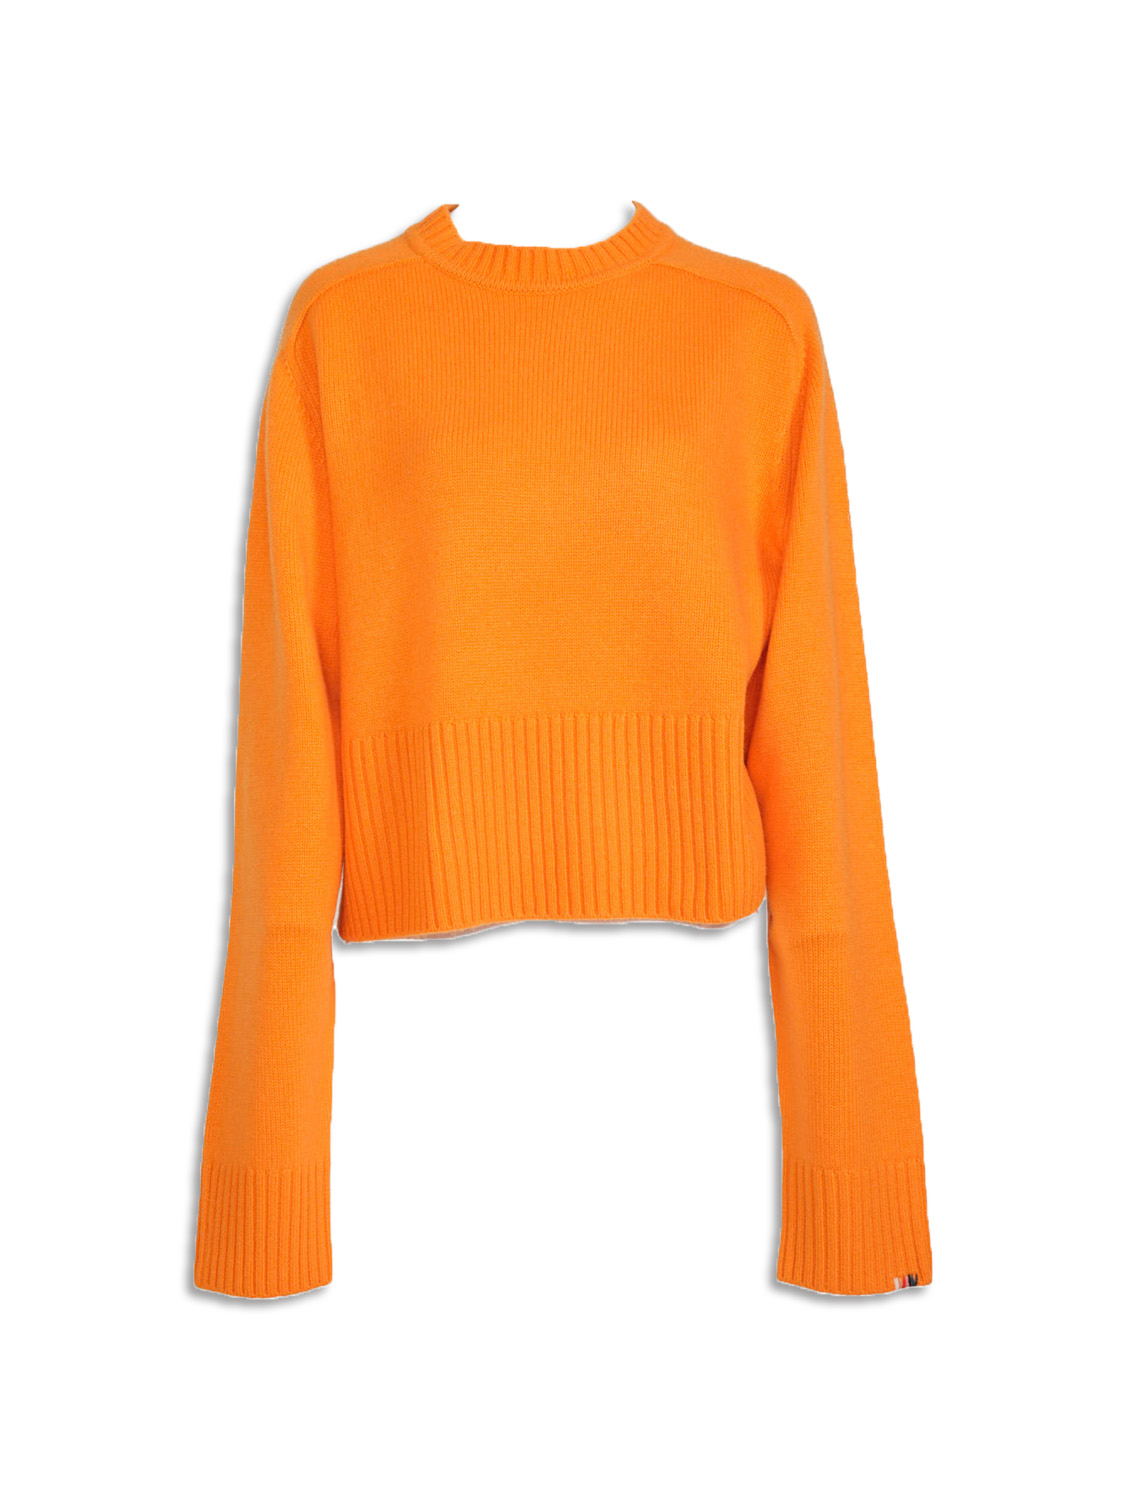 n° 256 Judith - Oversized Cashmere Sweater